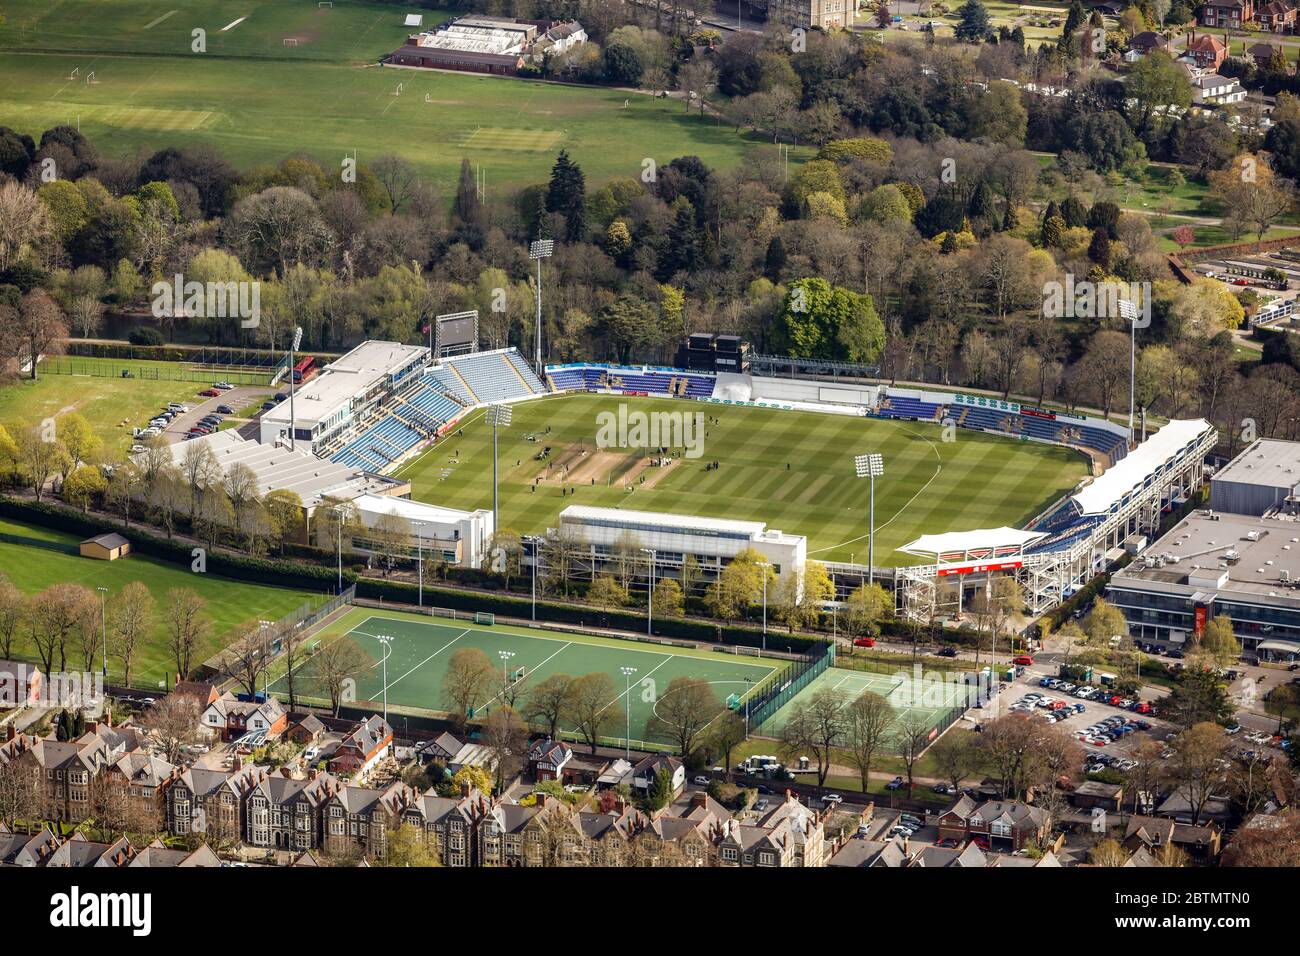 Aerial View of Sophia Gardens Cricket Ground Cardiff, Wales Stock Photo